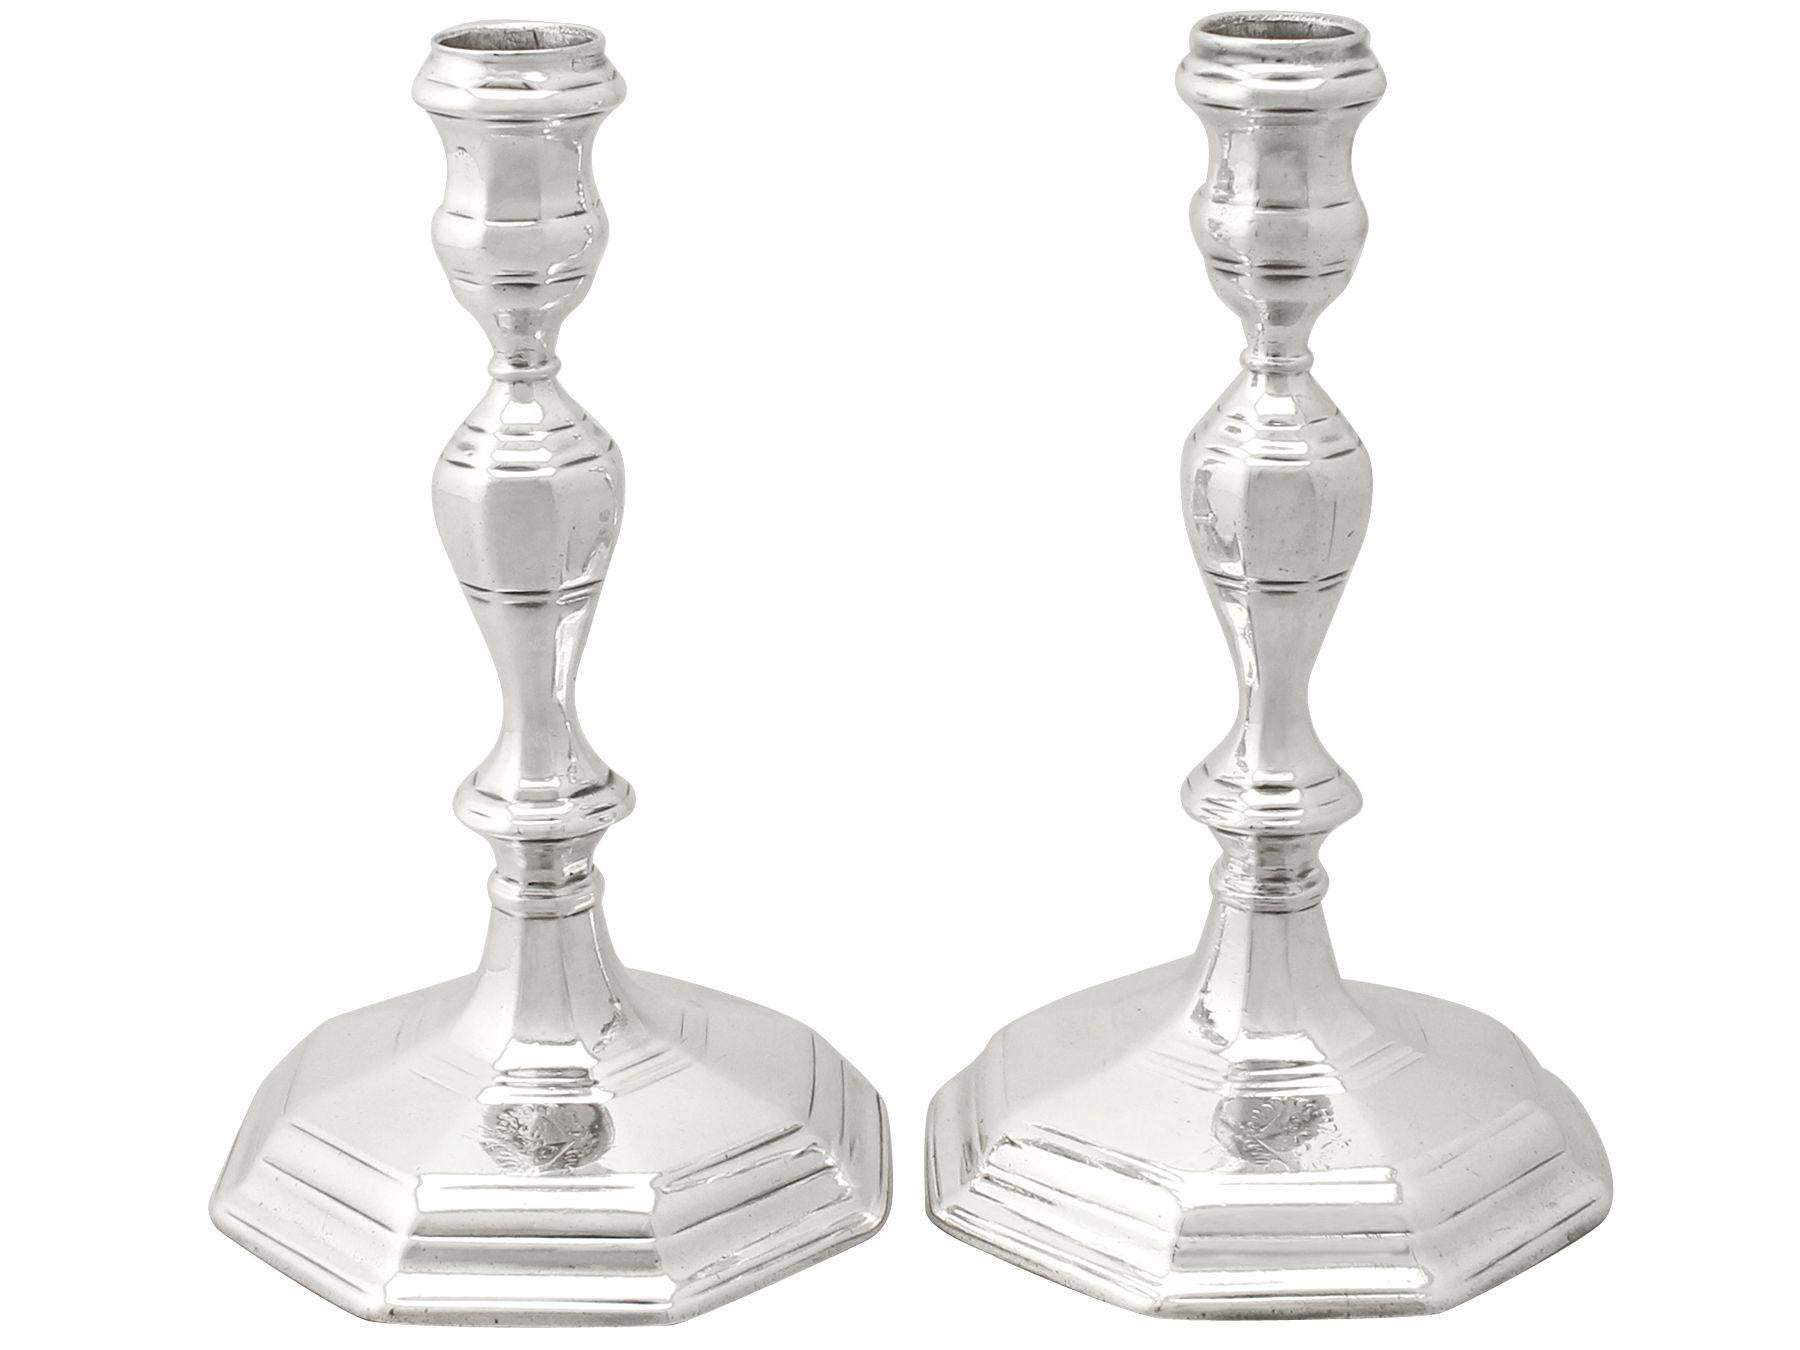 An exceptional, fine and impressive pair of antique English cast Britannia standard silver candlesticks; an addition to our early 18th century silverware collection.

These exceptional antique Britannia silver candlesticks have a plain octagonal